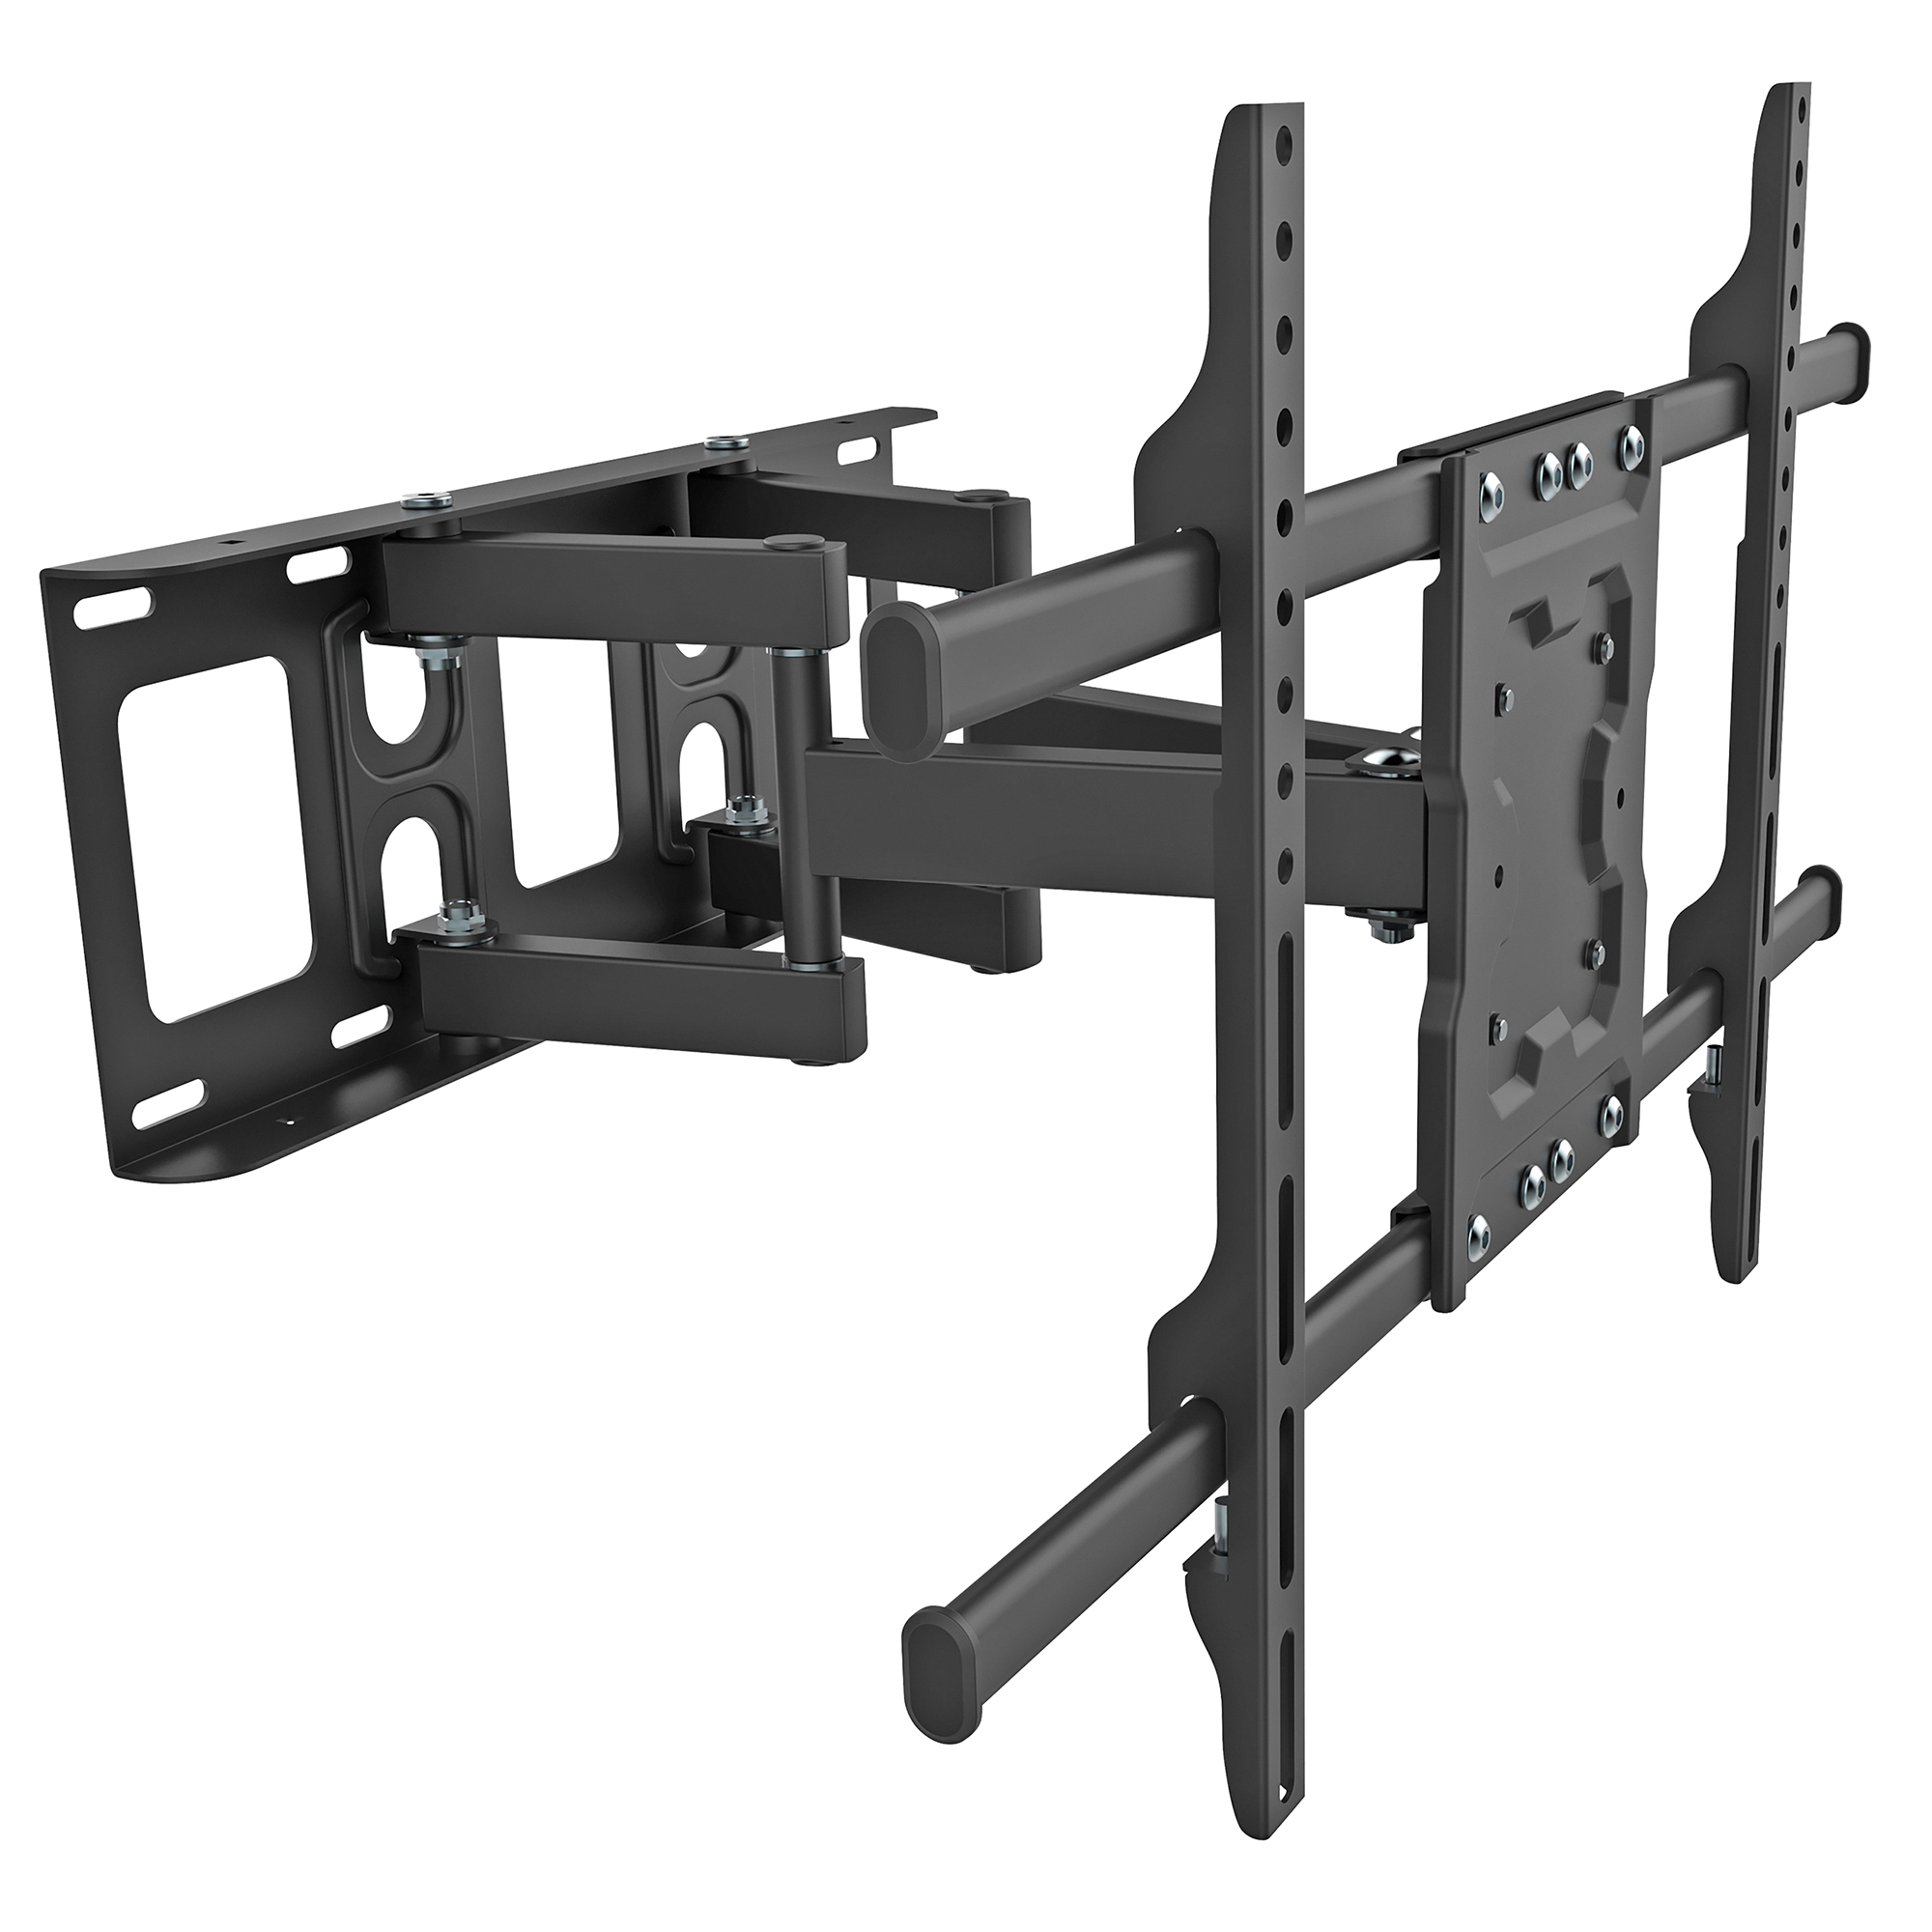 Peerless, 50Inch to 75Inch Full-Motion Tilting Wall Mount, Capacity 99 lb, Material Steel, Color Finish Black, Model A6X4